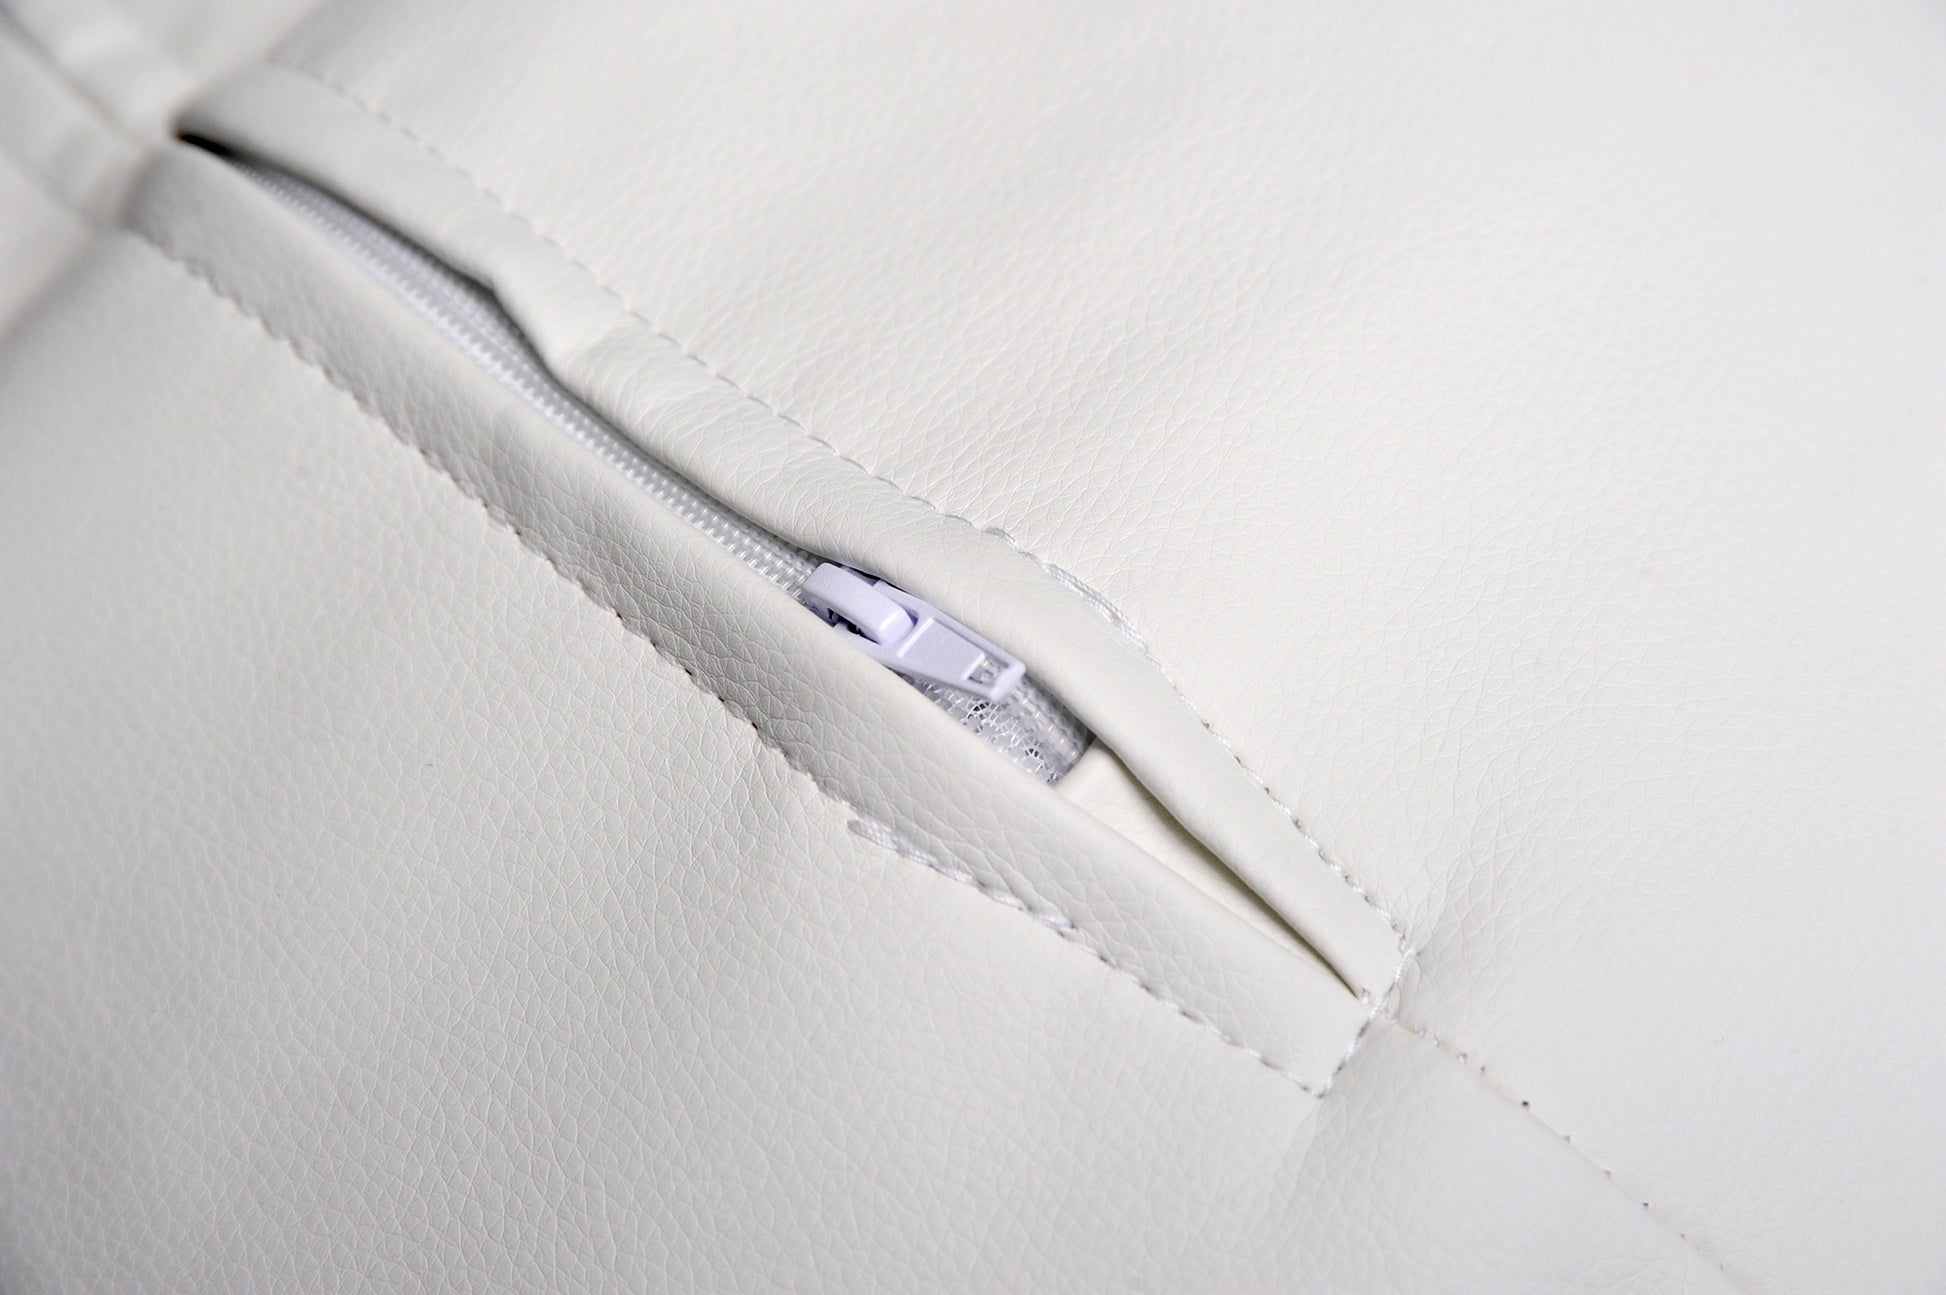 Detailed view of the quality seam with zipper of a white newborn photography prop pillow.